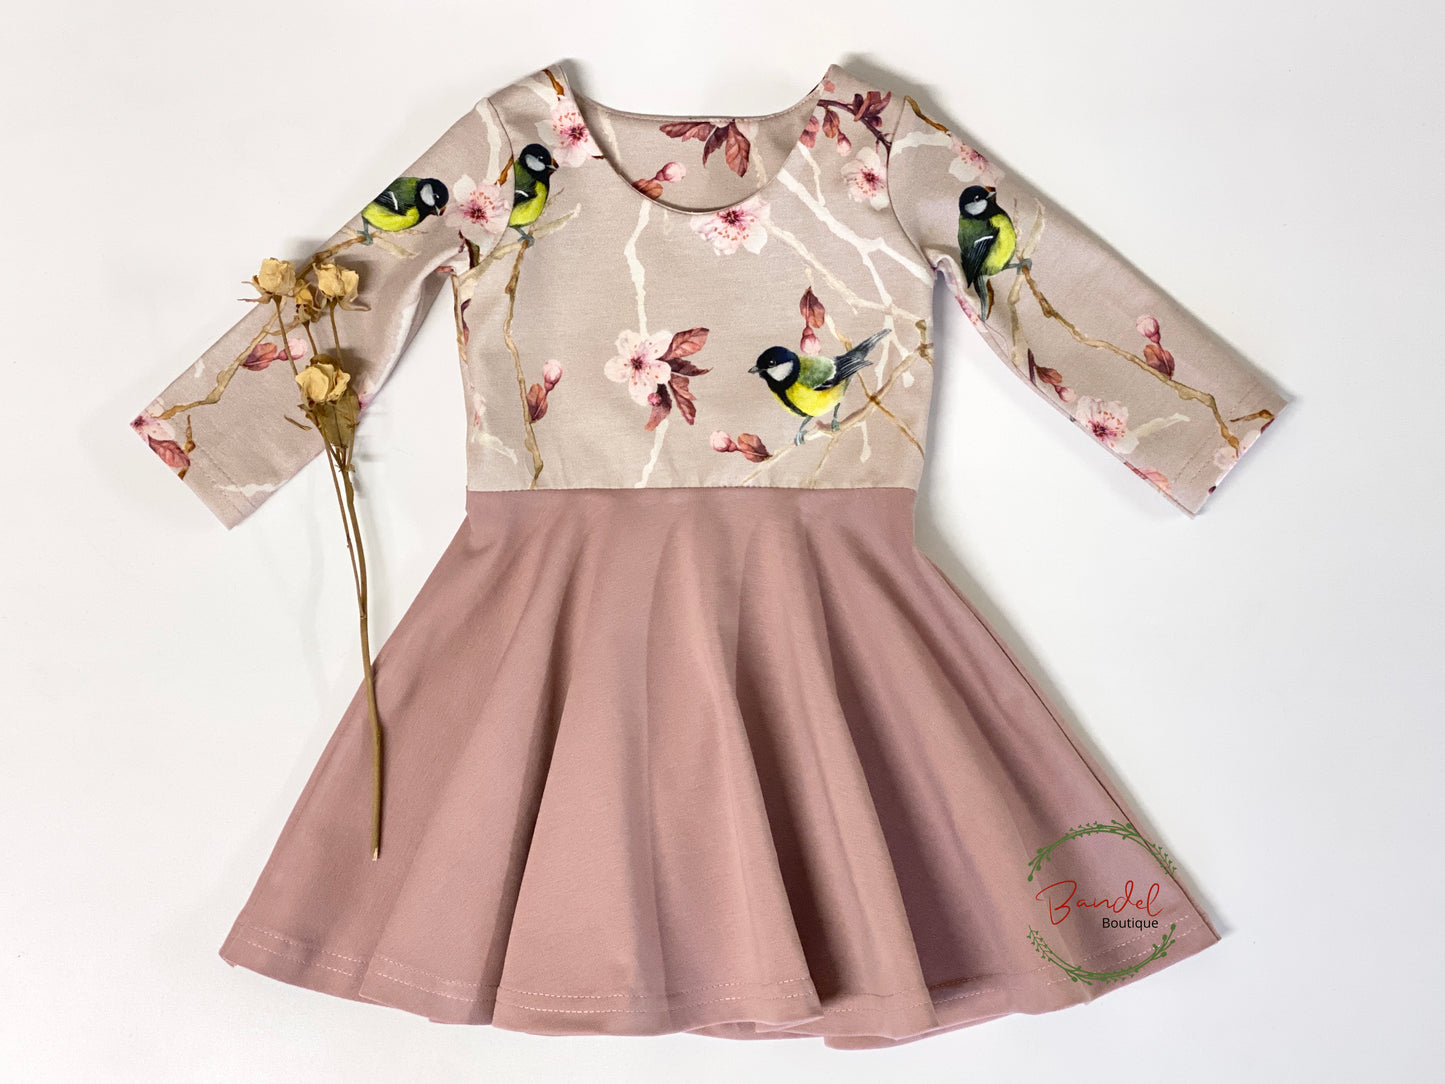 Blossom Bird Twirly dress is a timeless and elegant garment for your little girl. Crafted from comfortable jersey cotton, it features a slim fit with a vintage length that falls just above the knee. The bird blossom print and slim long sleeves will be the perfect finishing touches for any outfit.